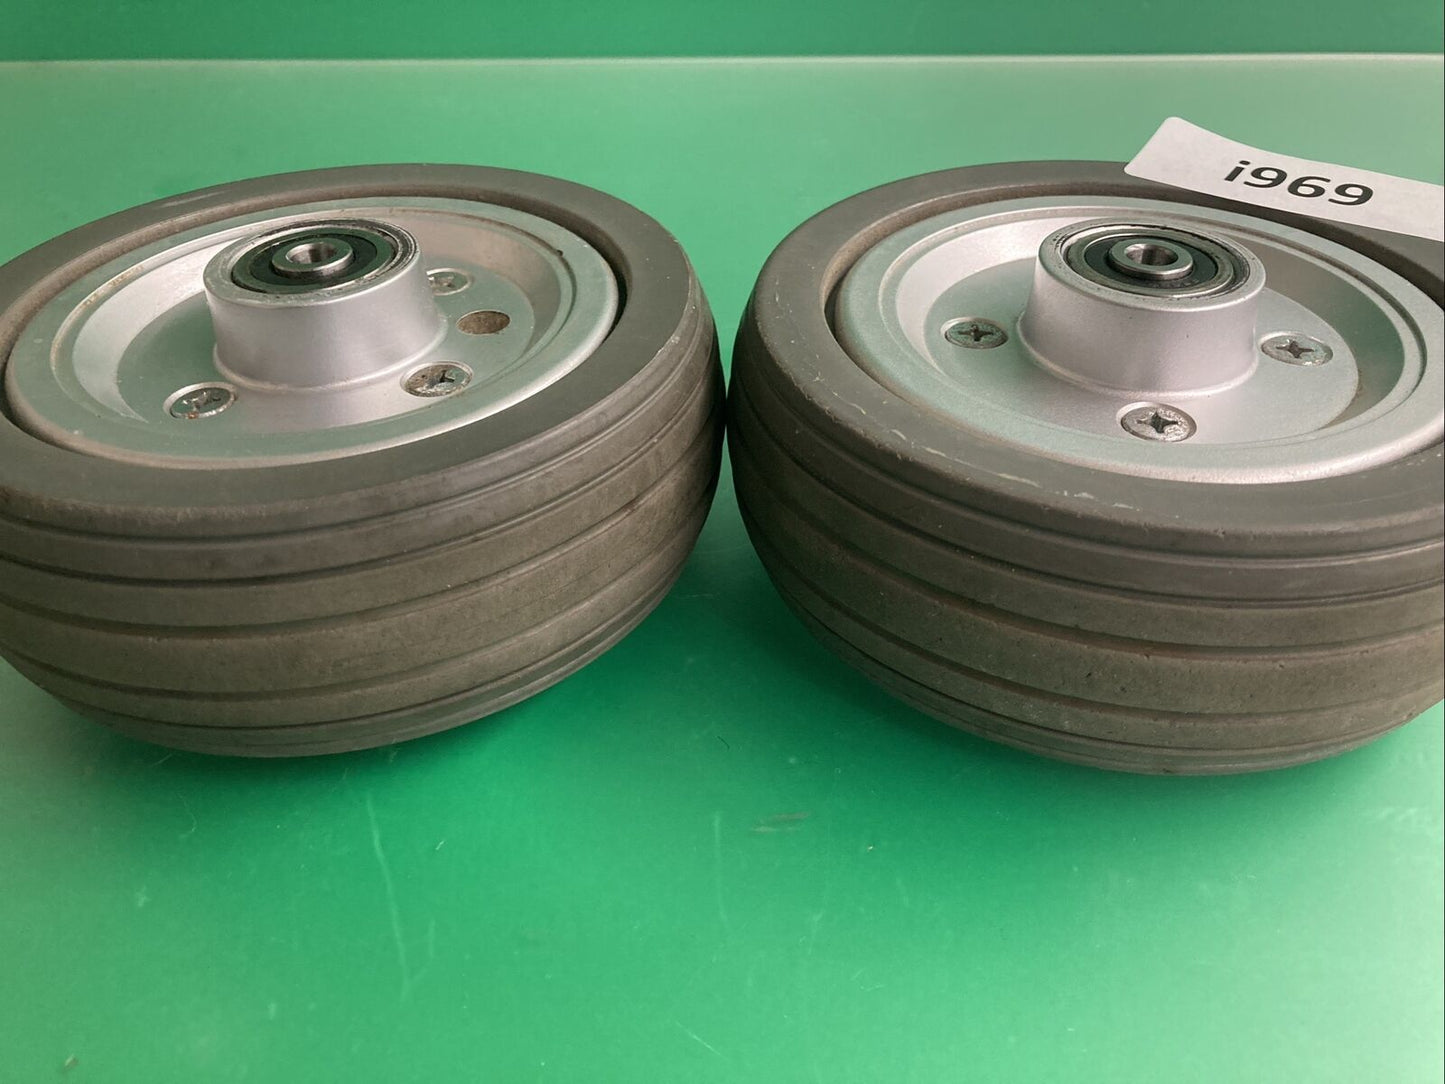 Solid Rear Caster Wheels for the Pride Jazzy  J6 / Quantum J6 Powerchair #i969